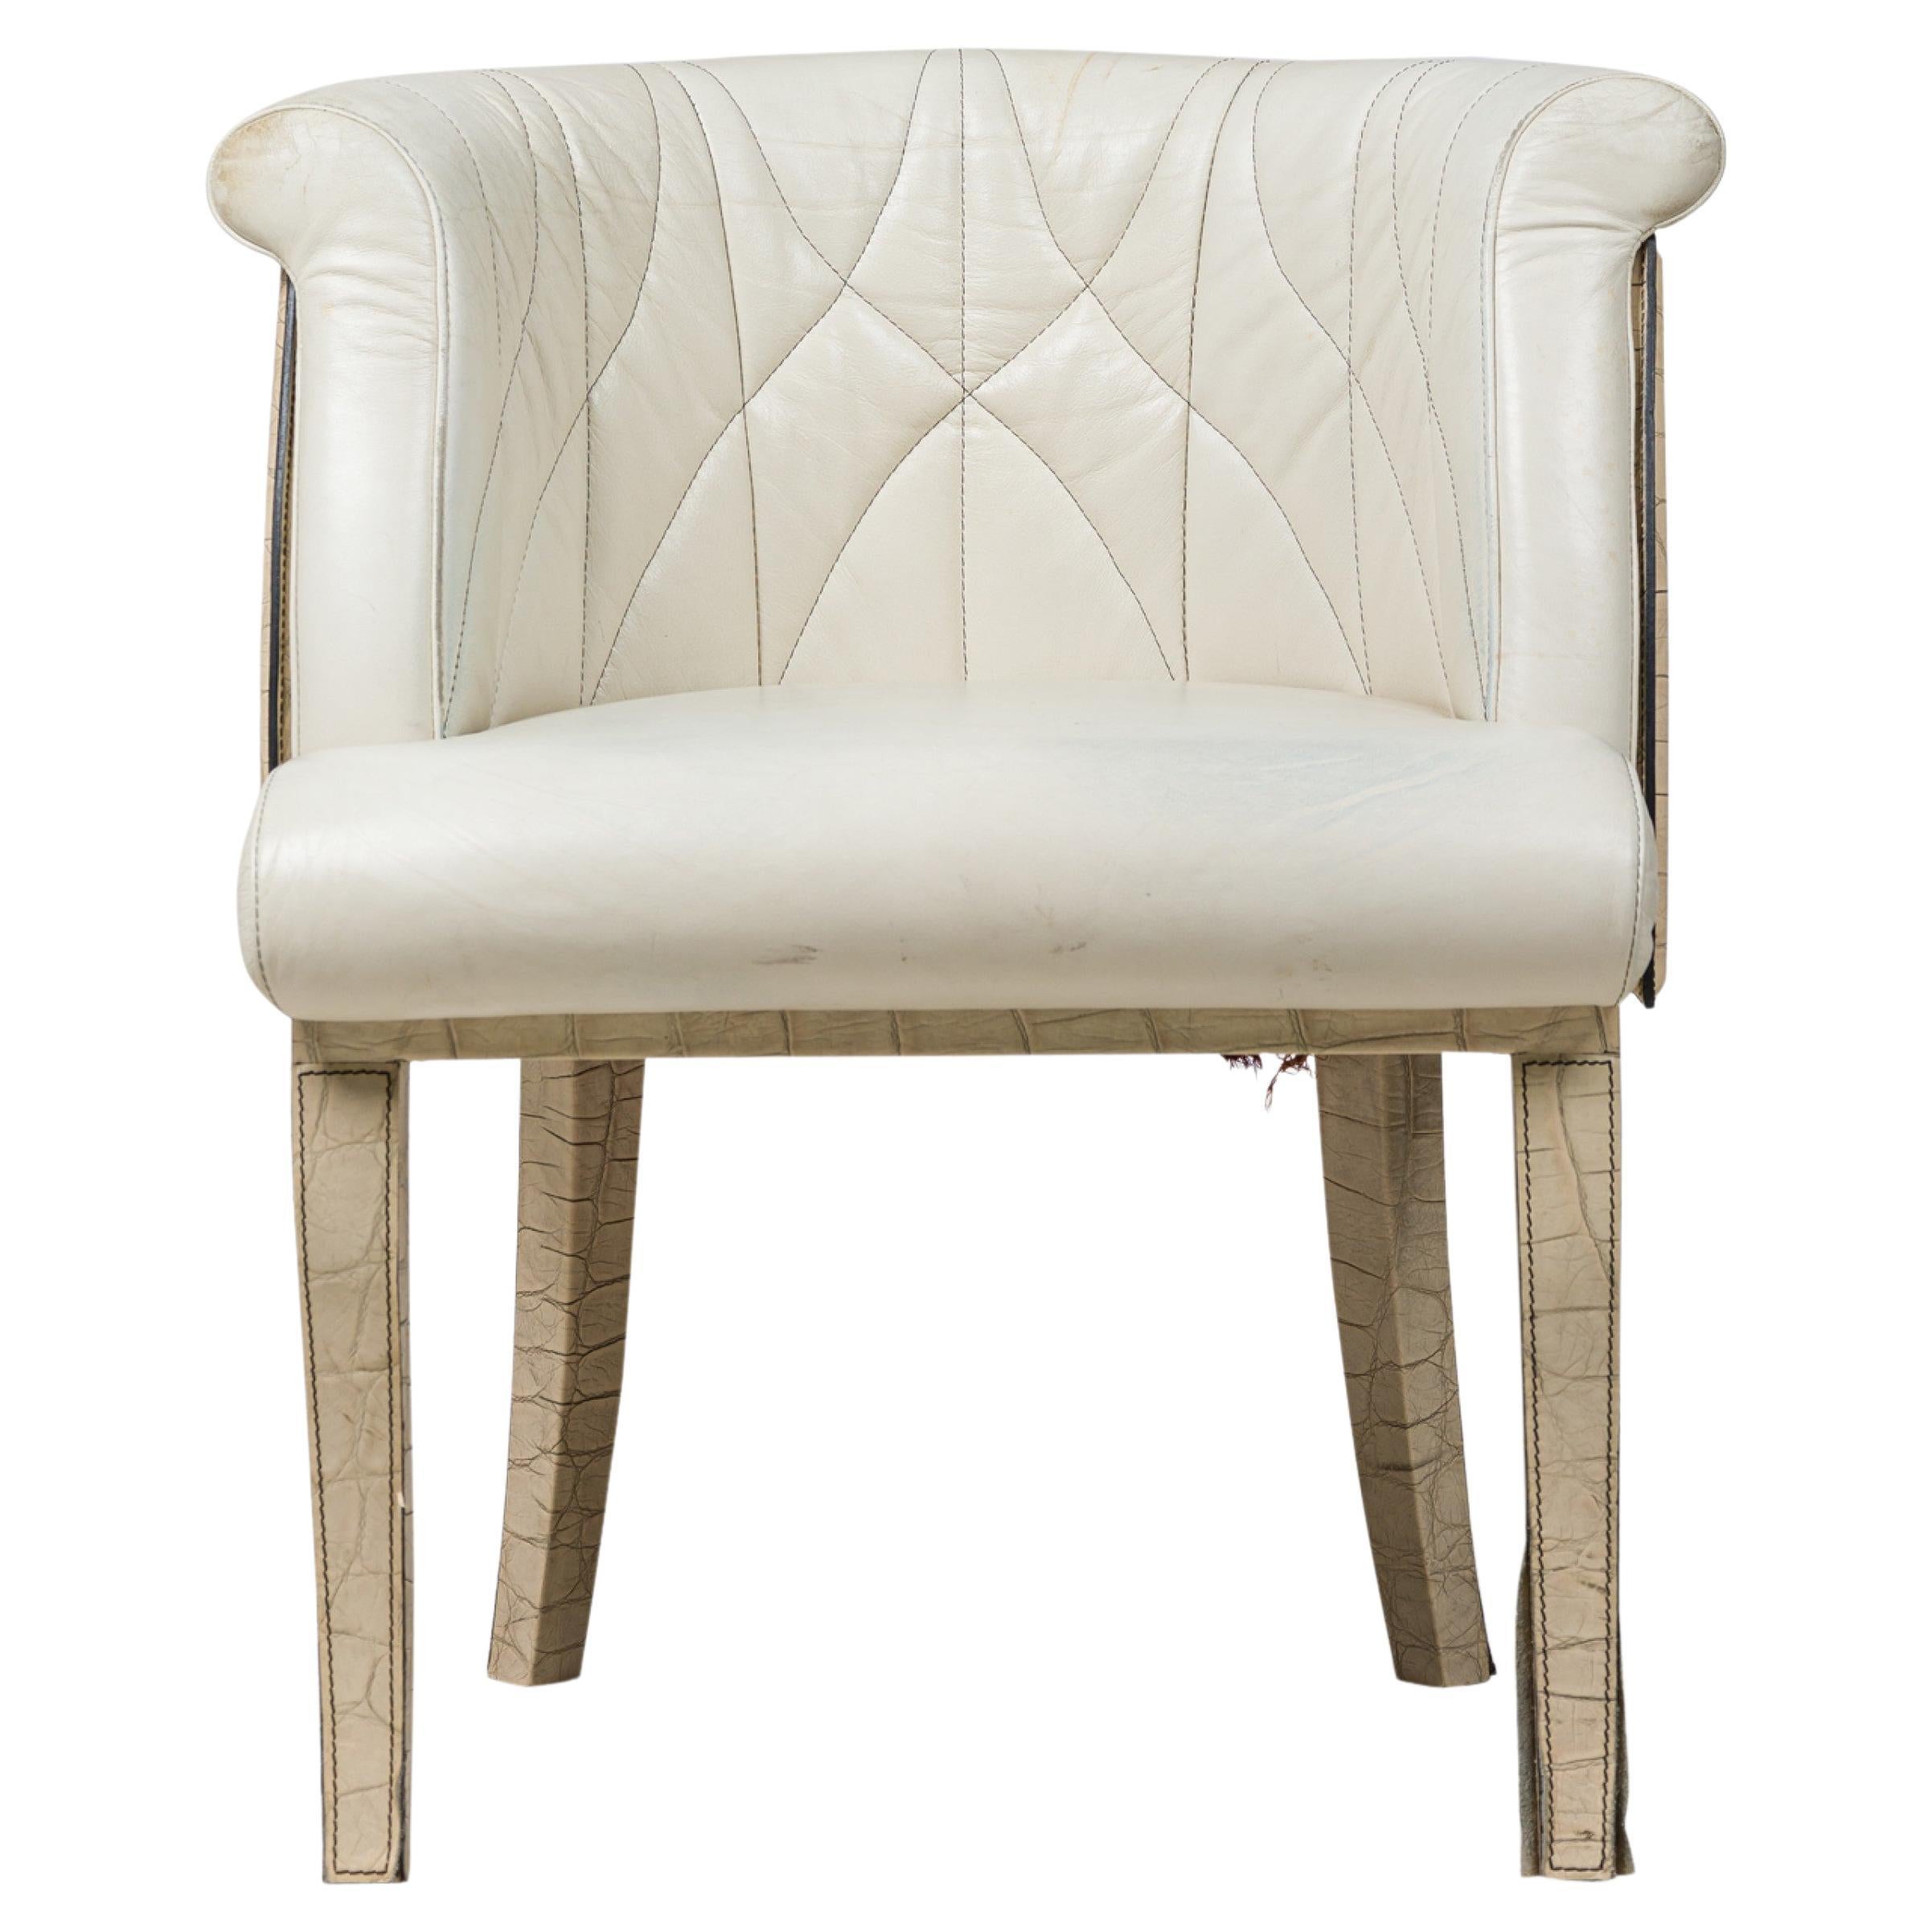 American White Faux Snakeskin & Leather Upholstered Quilted Dining / Side Chair